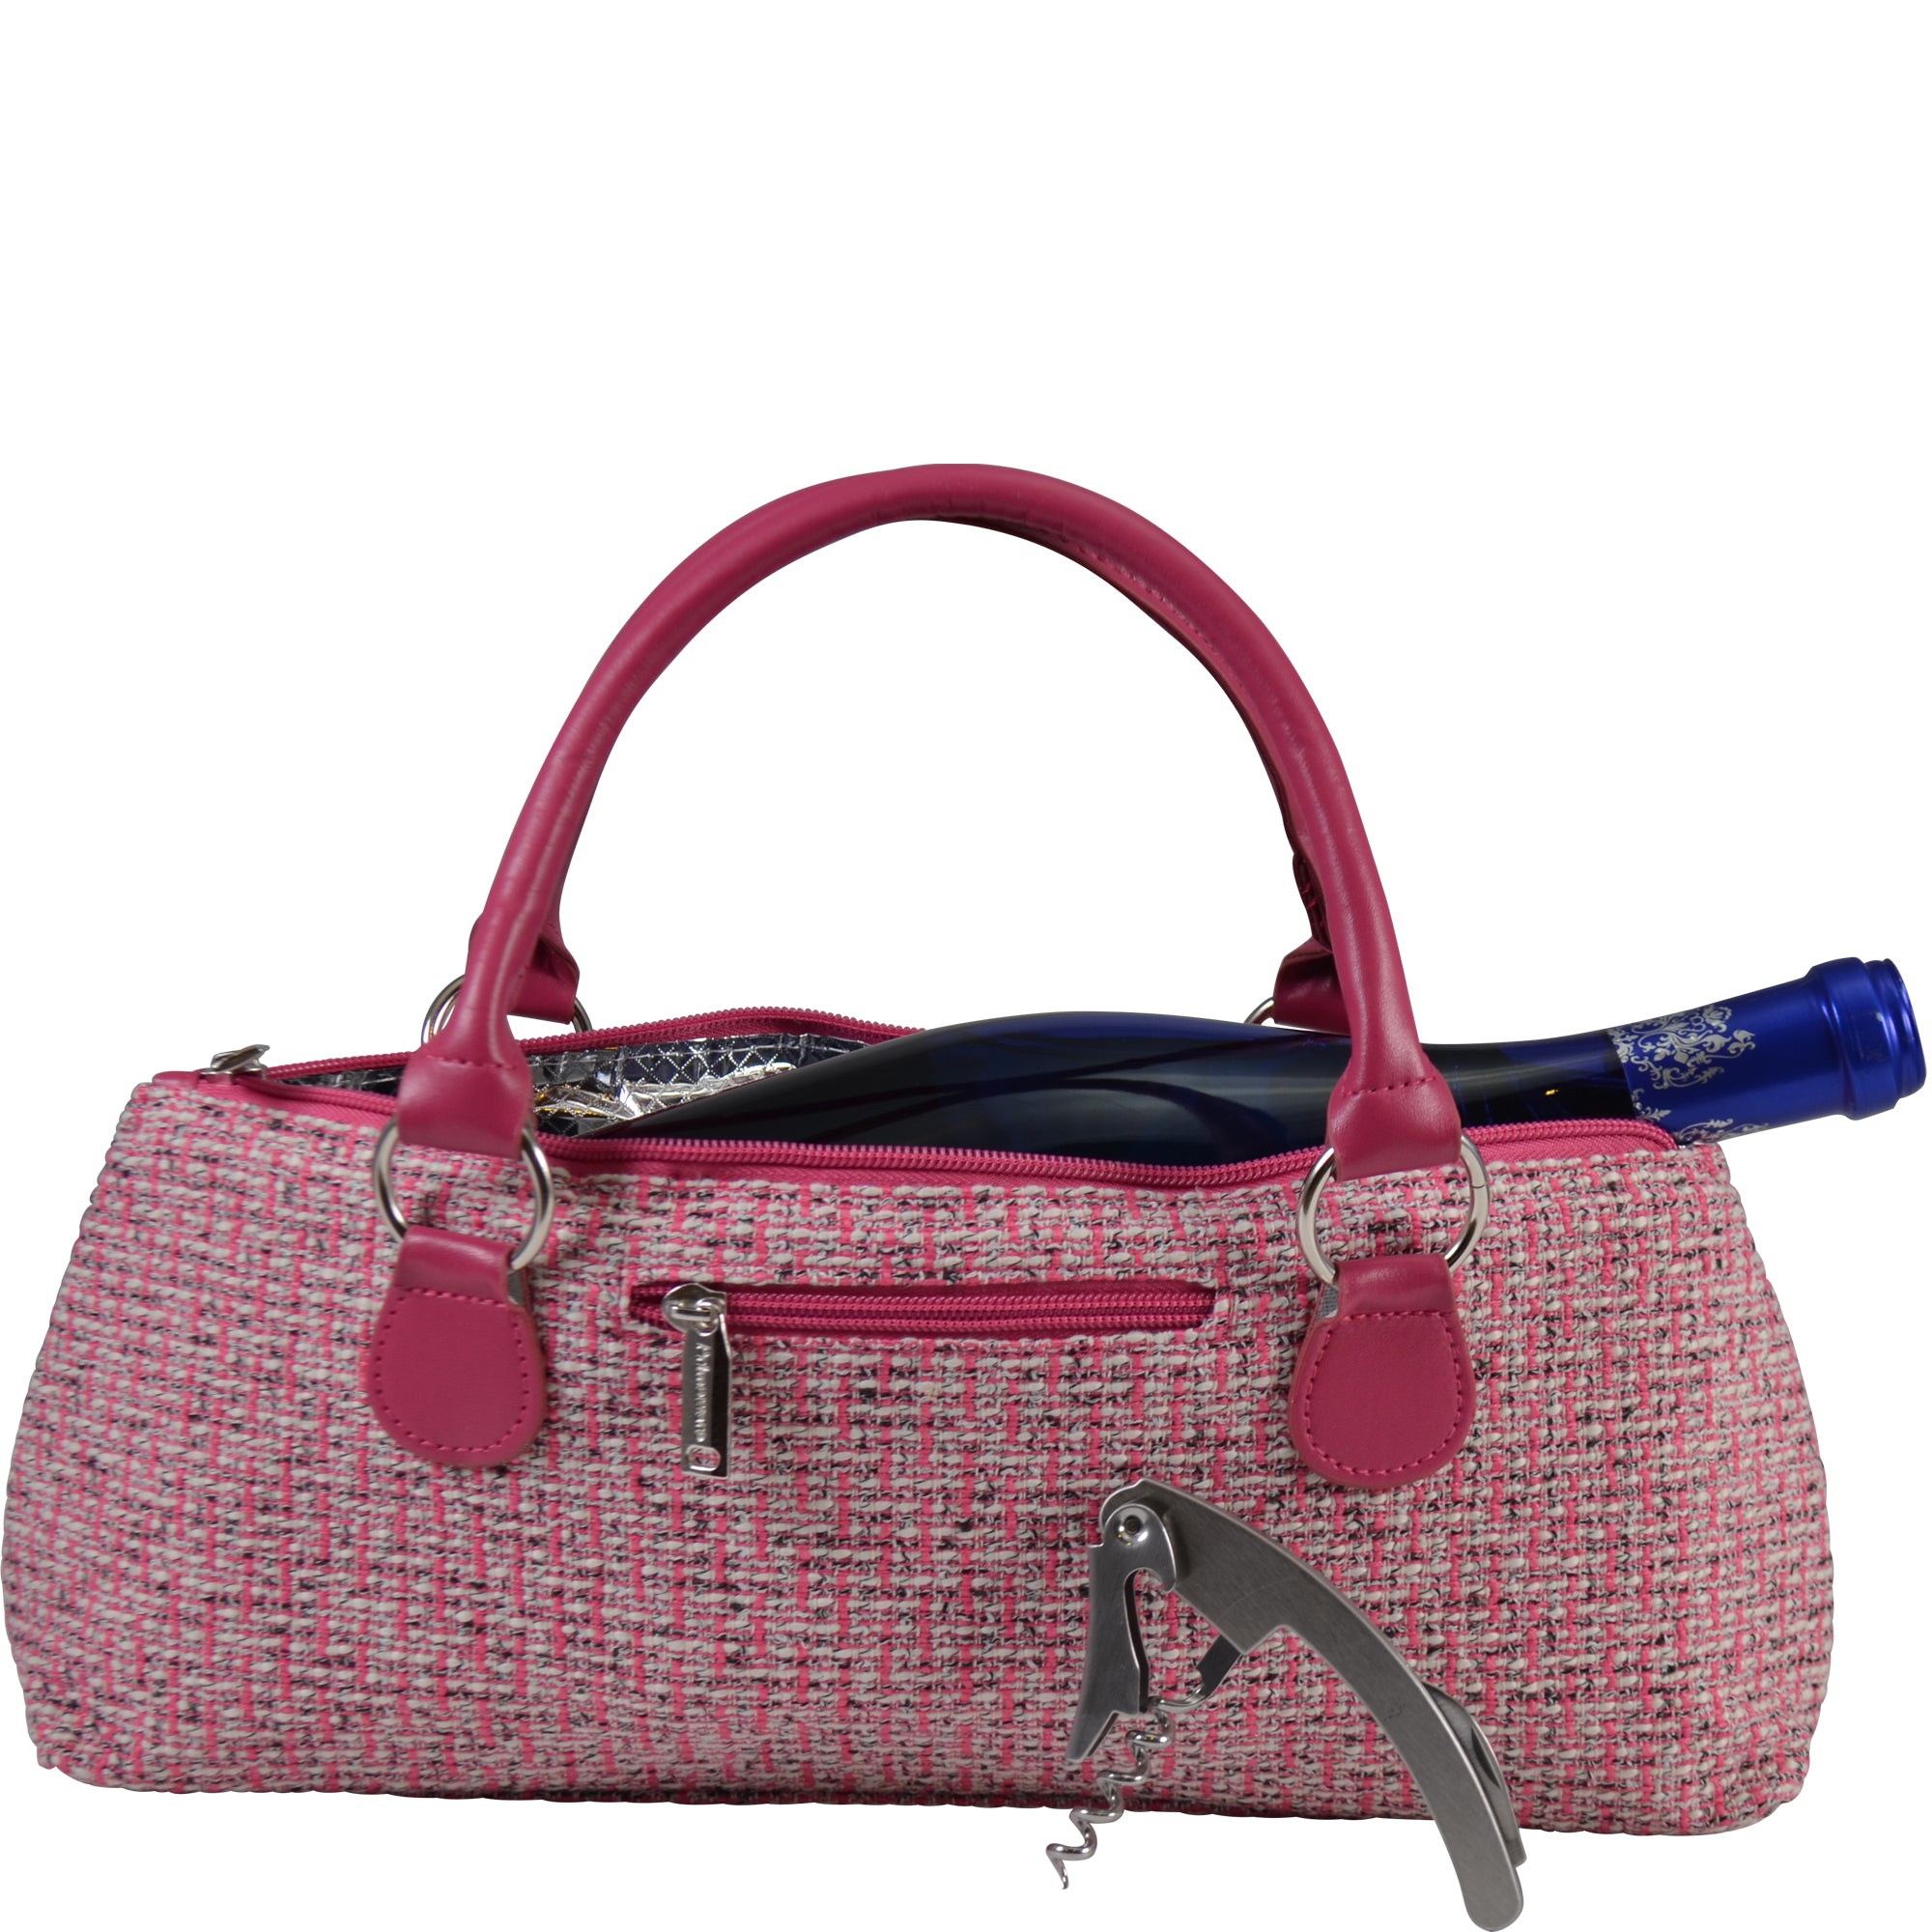 Connect Inc Purses Bags - Buy Connect Inc Purses Bags online in India